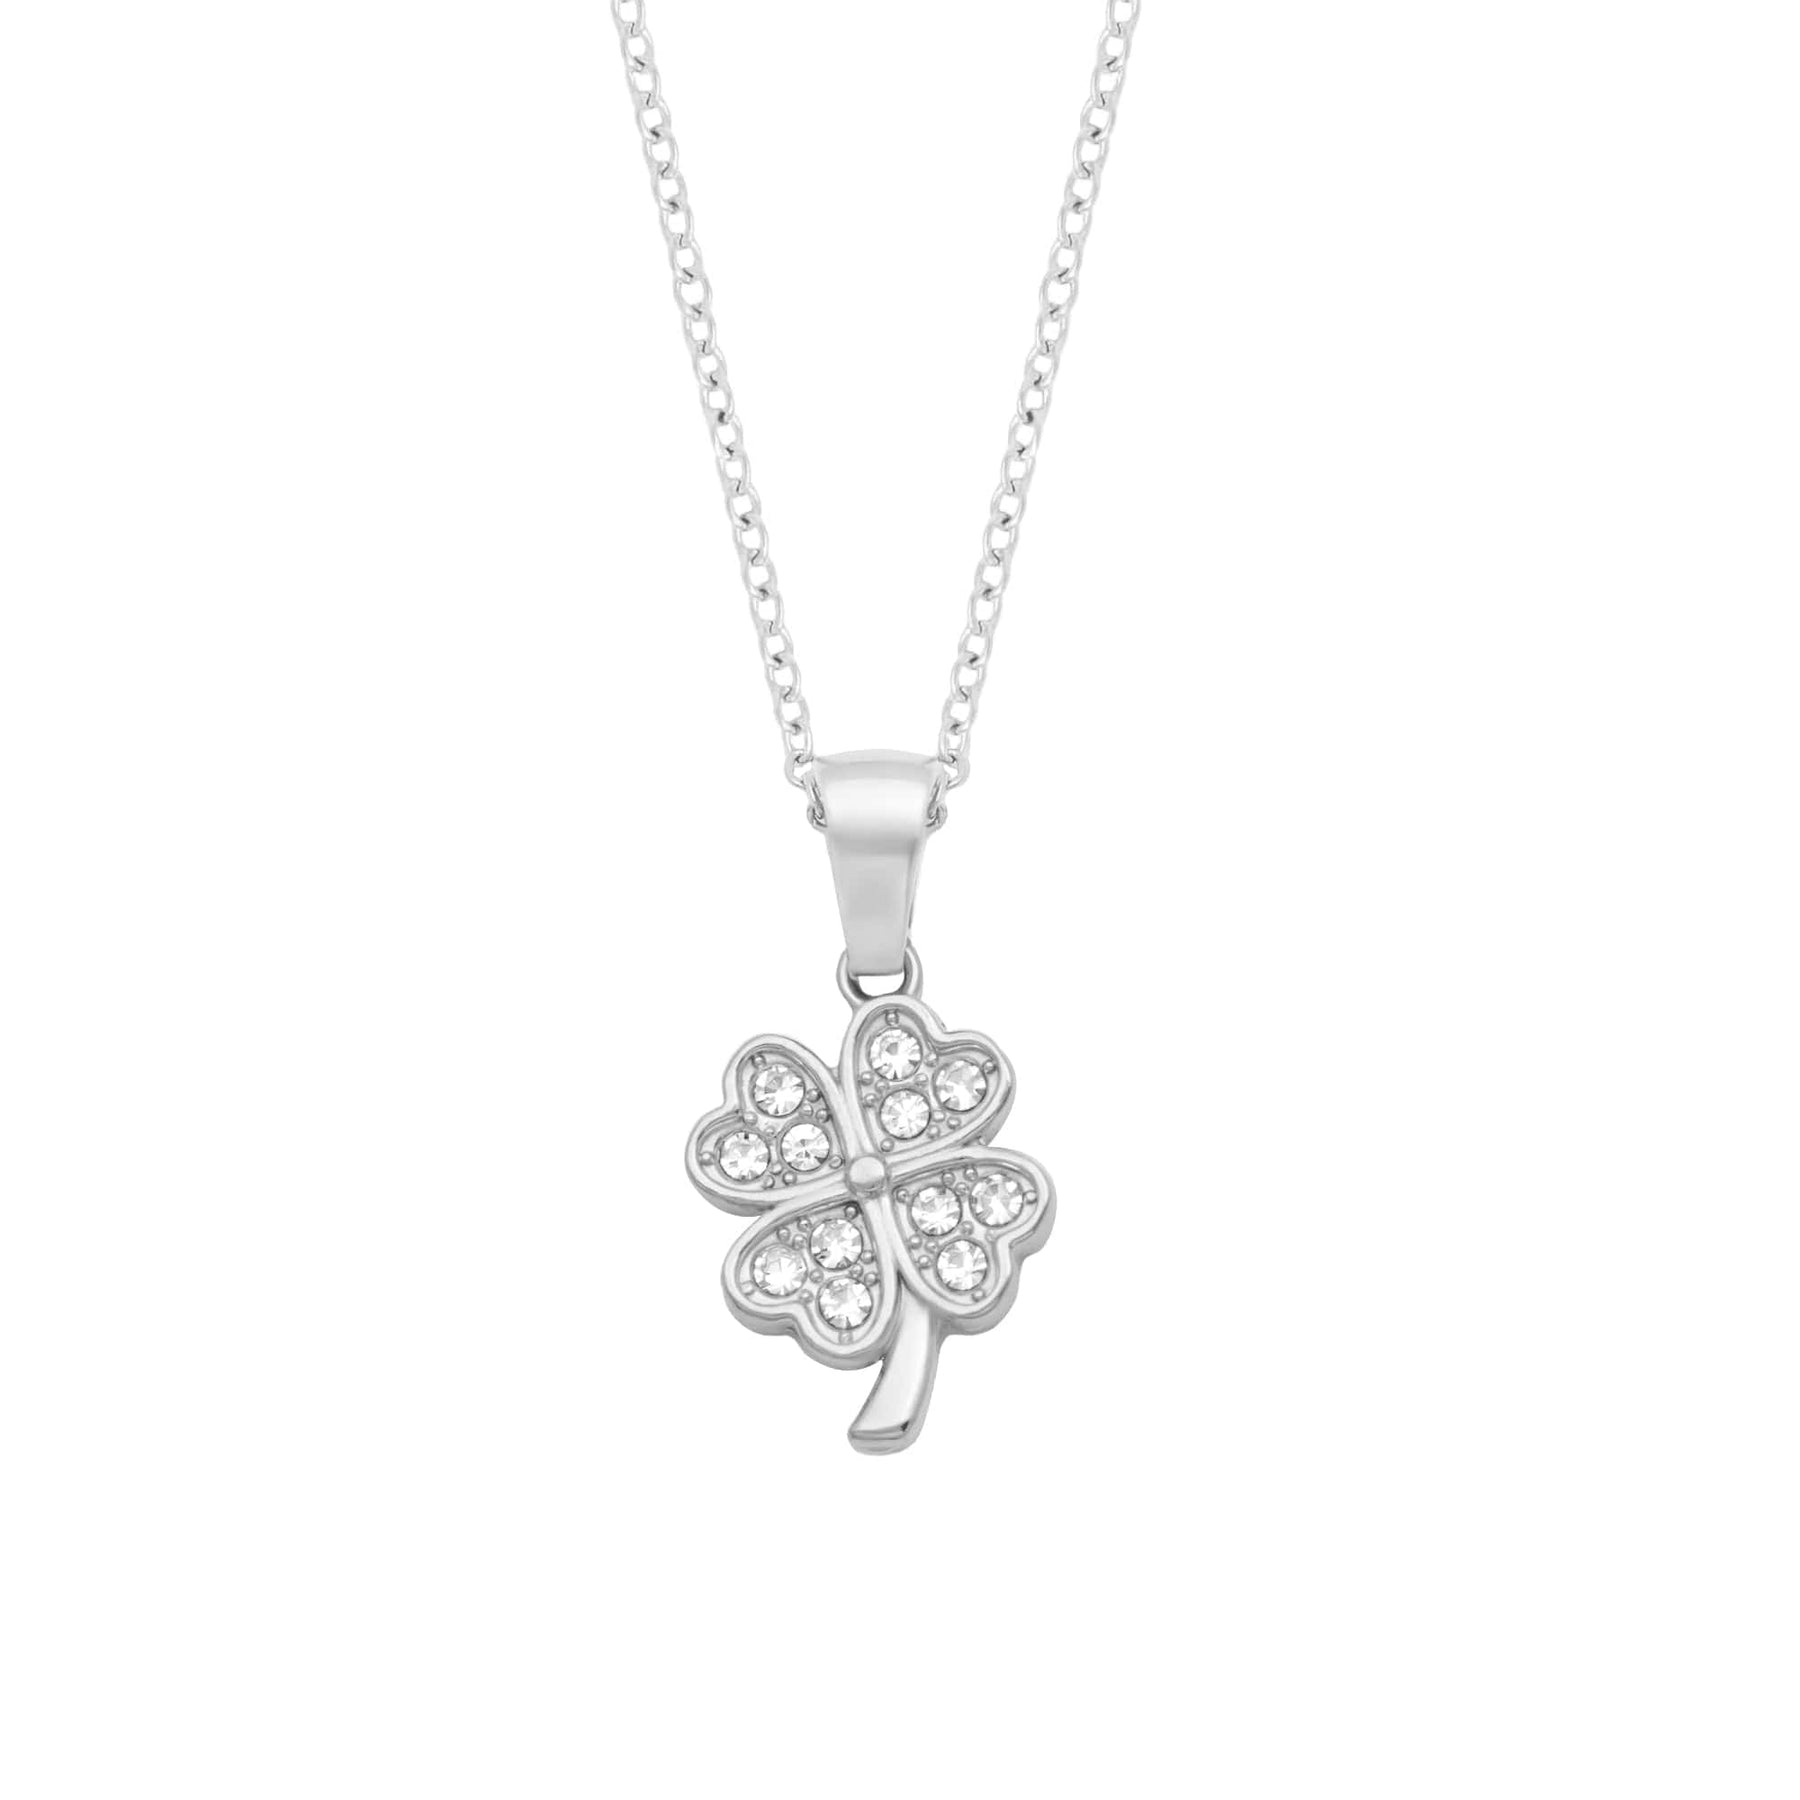 BohoMoon Stainless Steel Clover Necklace Silver